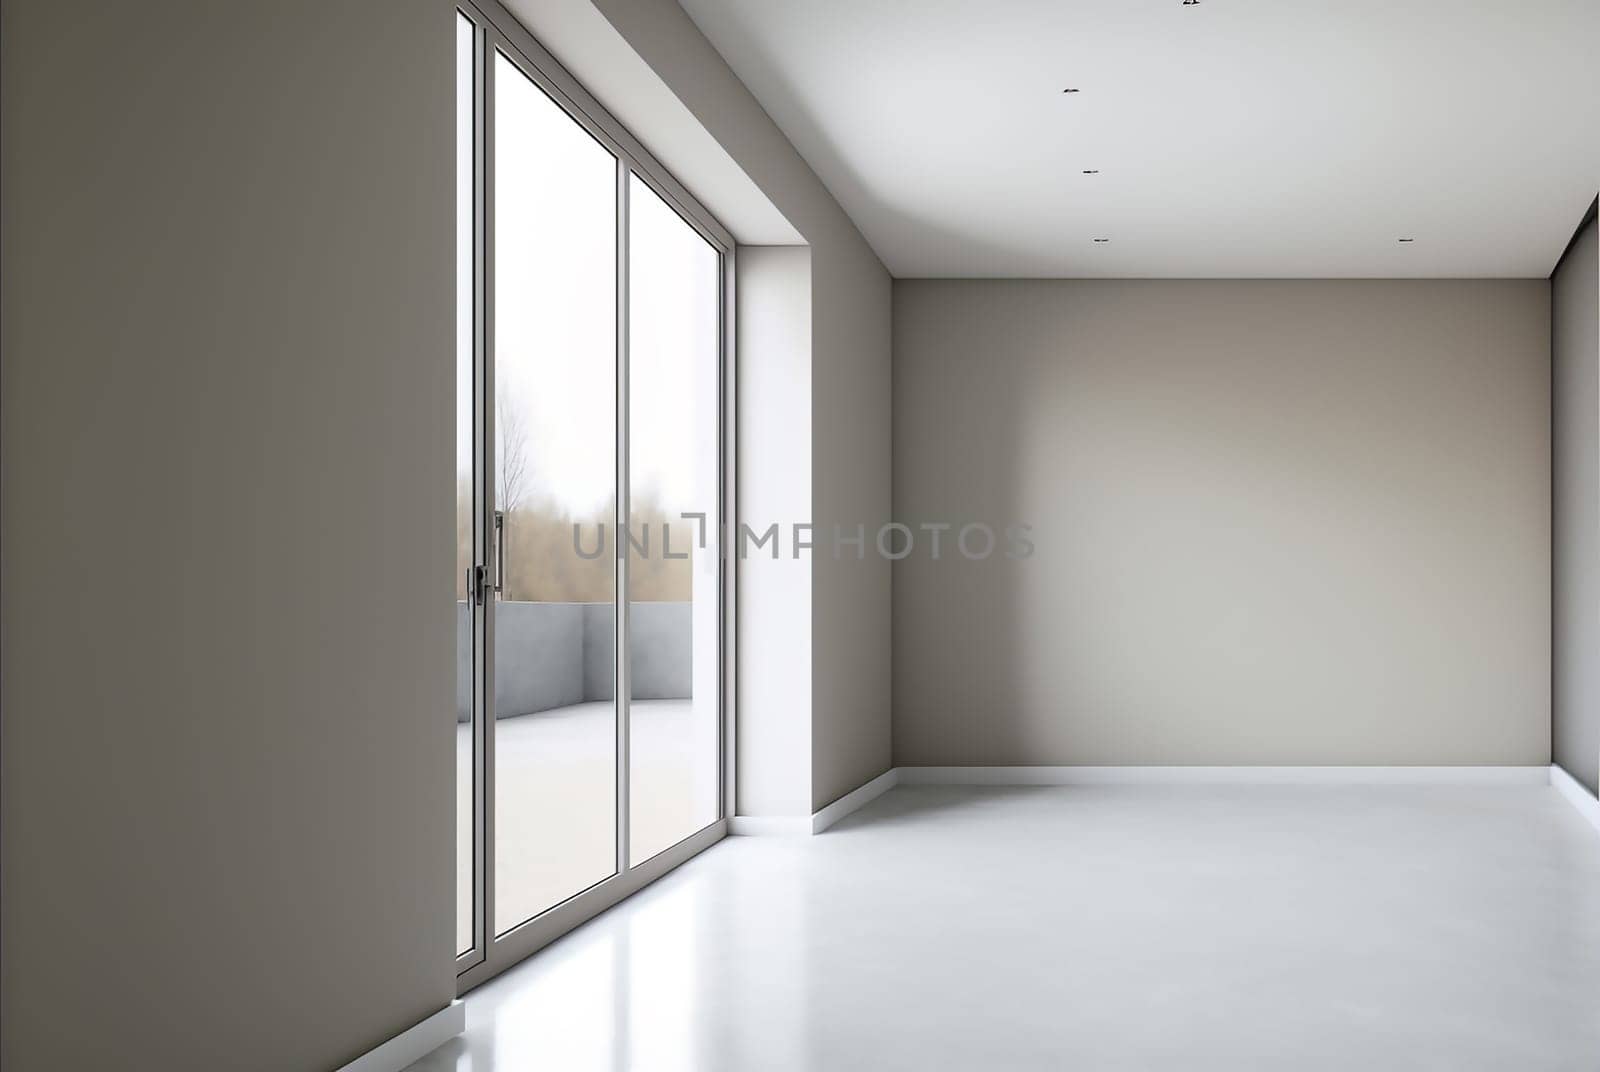 the interior of an empty room with a large window and access to a balcony, by Zakharova